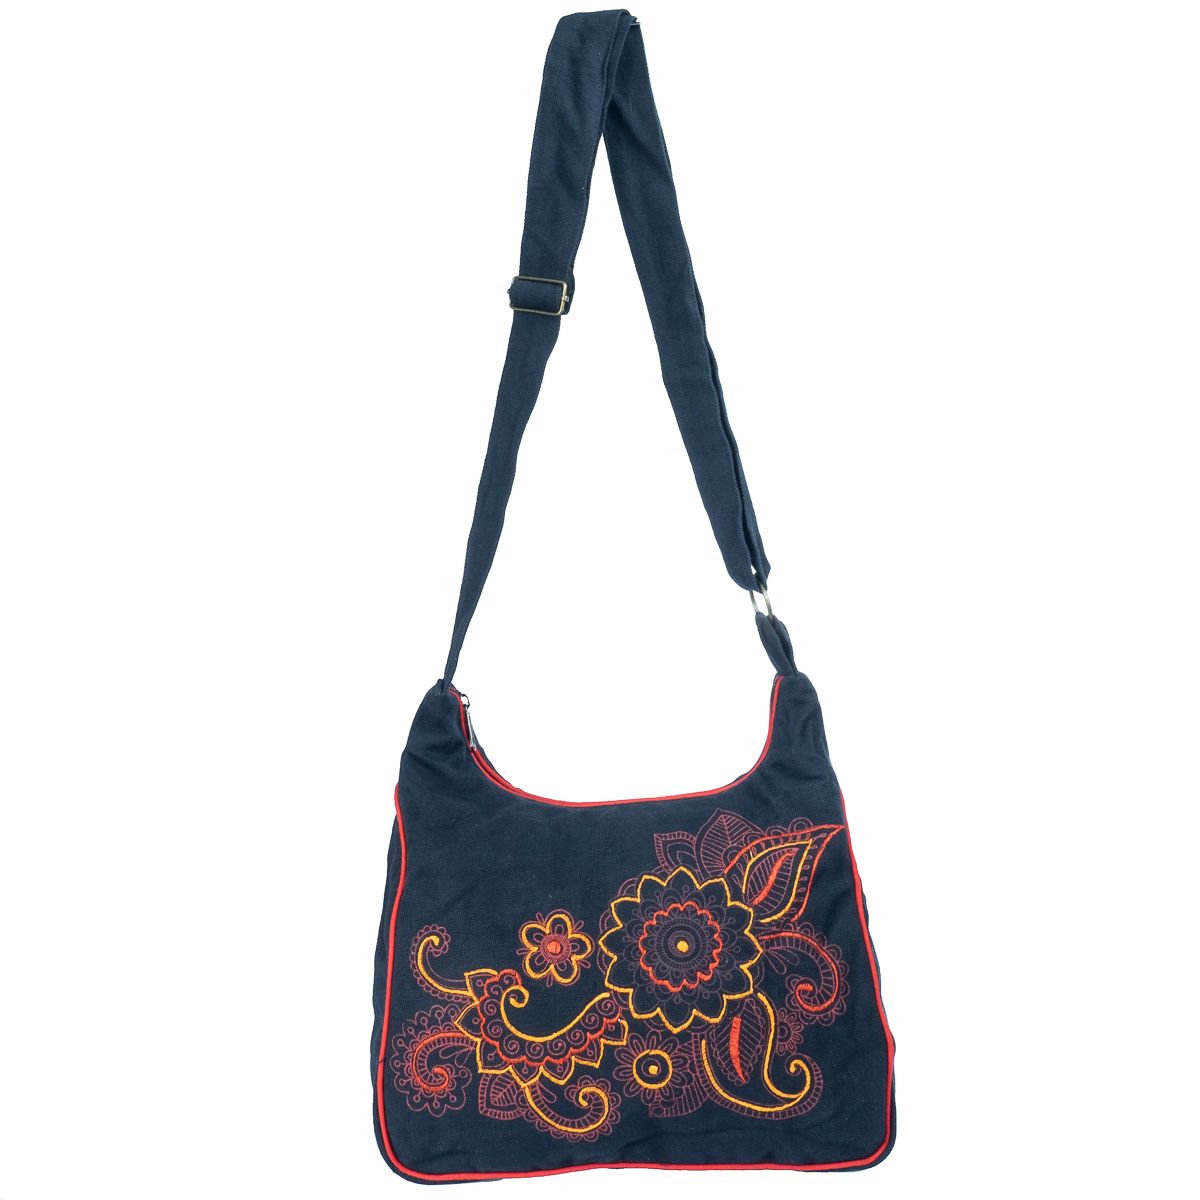 Ethno bag with embroidered flowers Albena Merah Nepal